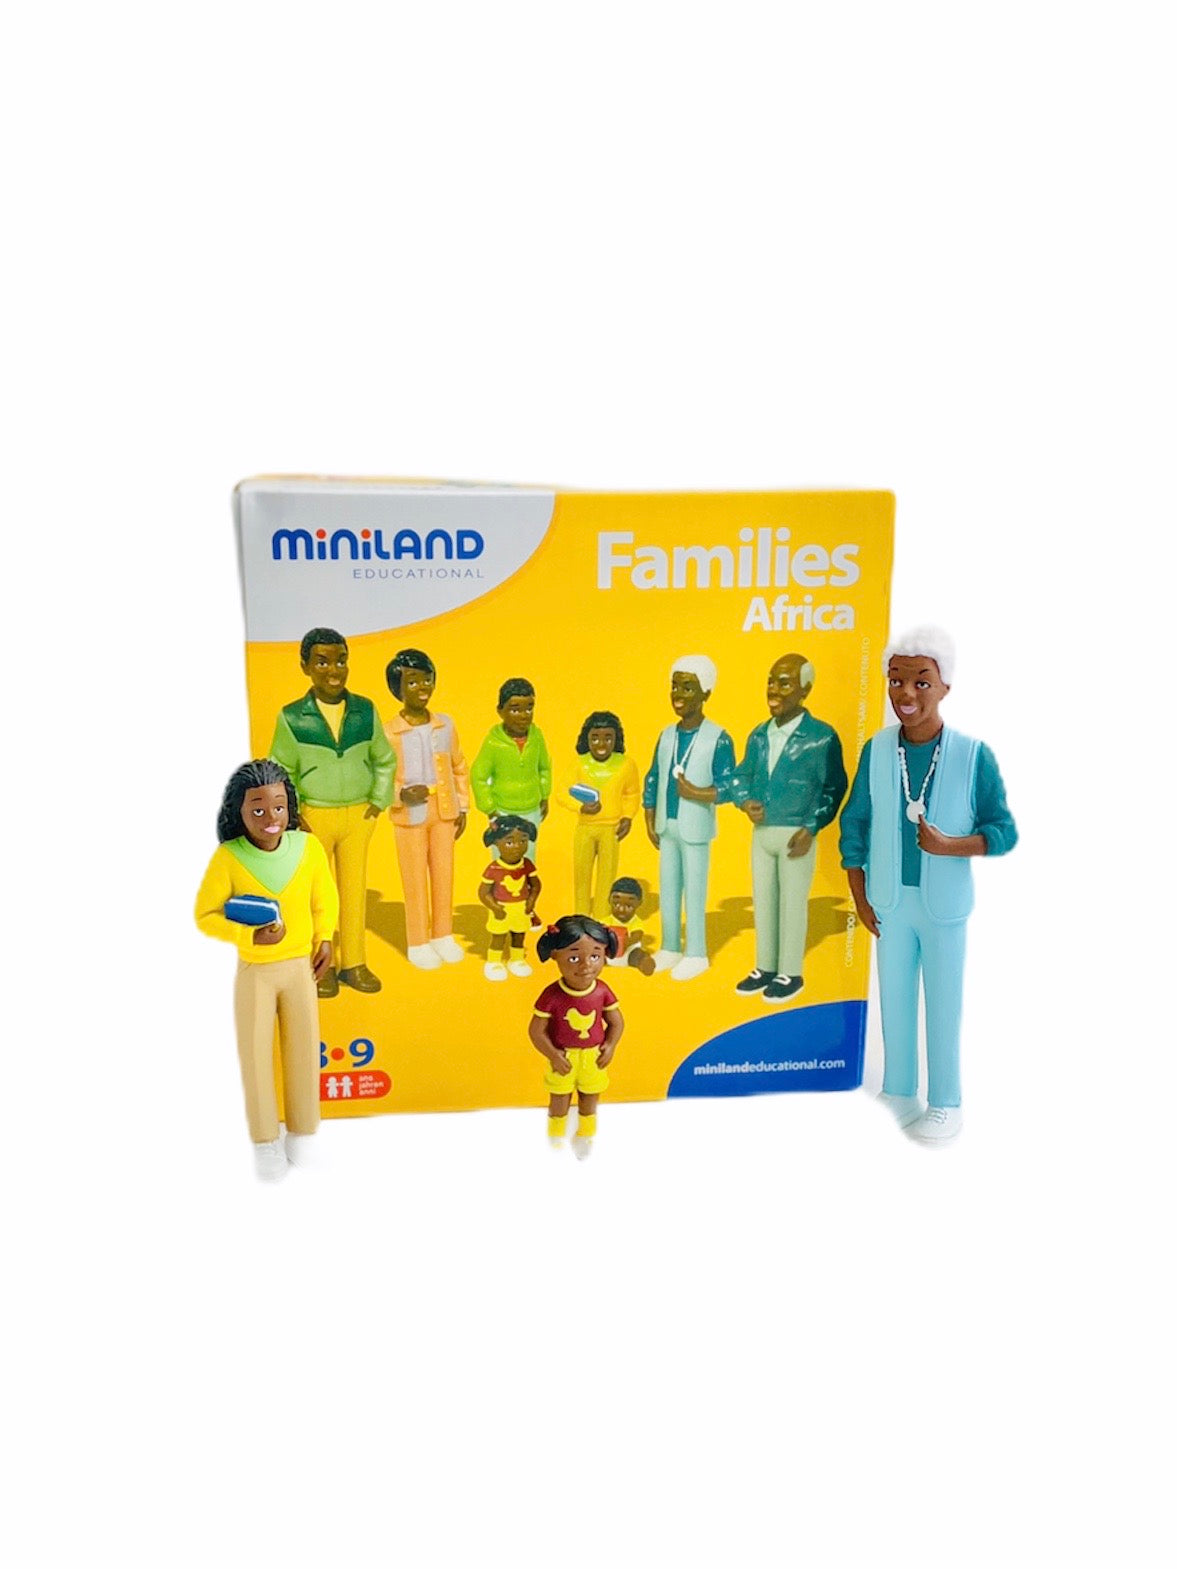 Miniland Figures - Families African on display with figures in front of box